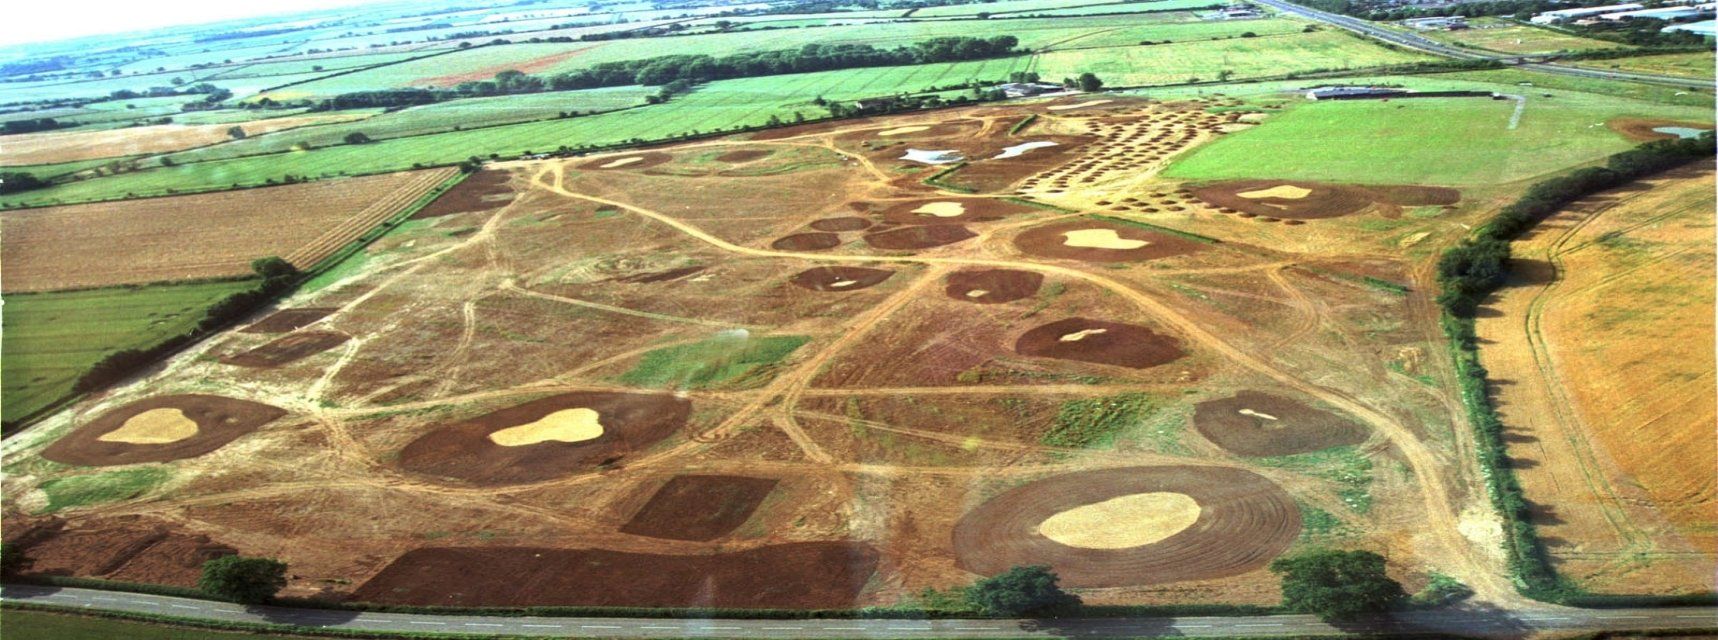 Aerial view of the golf course under construction